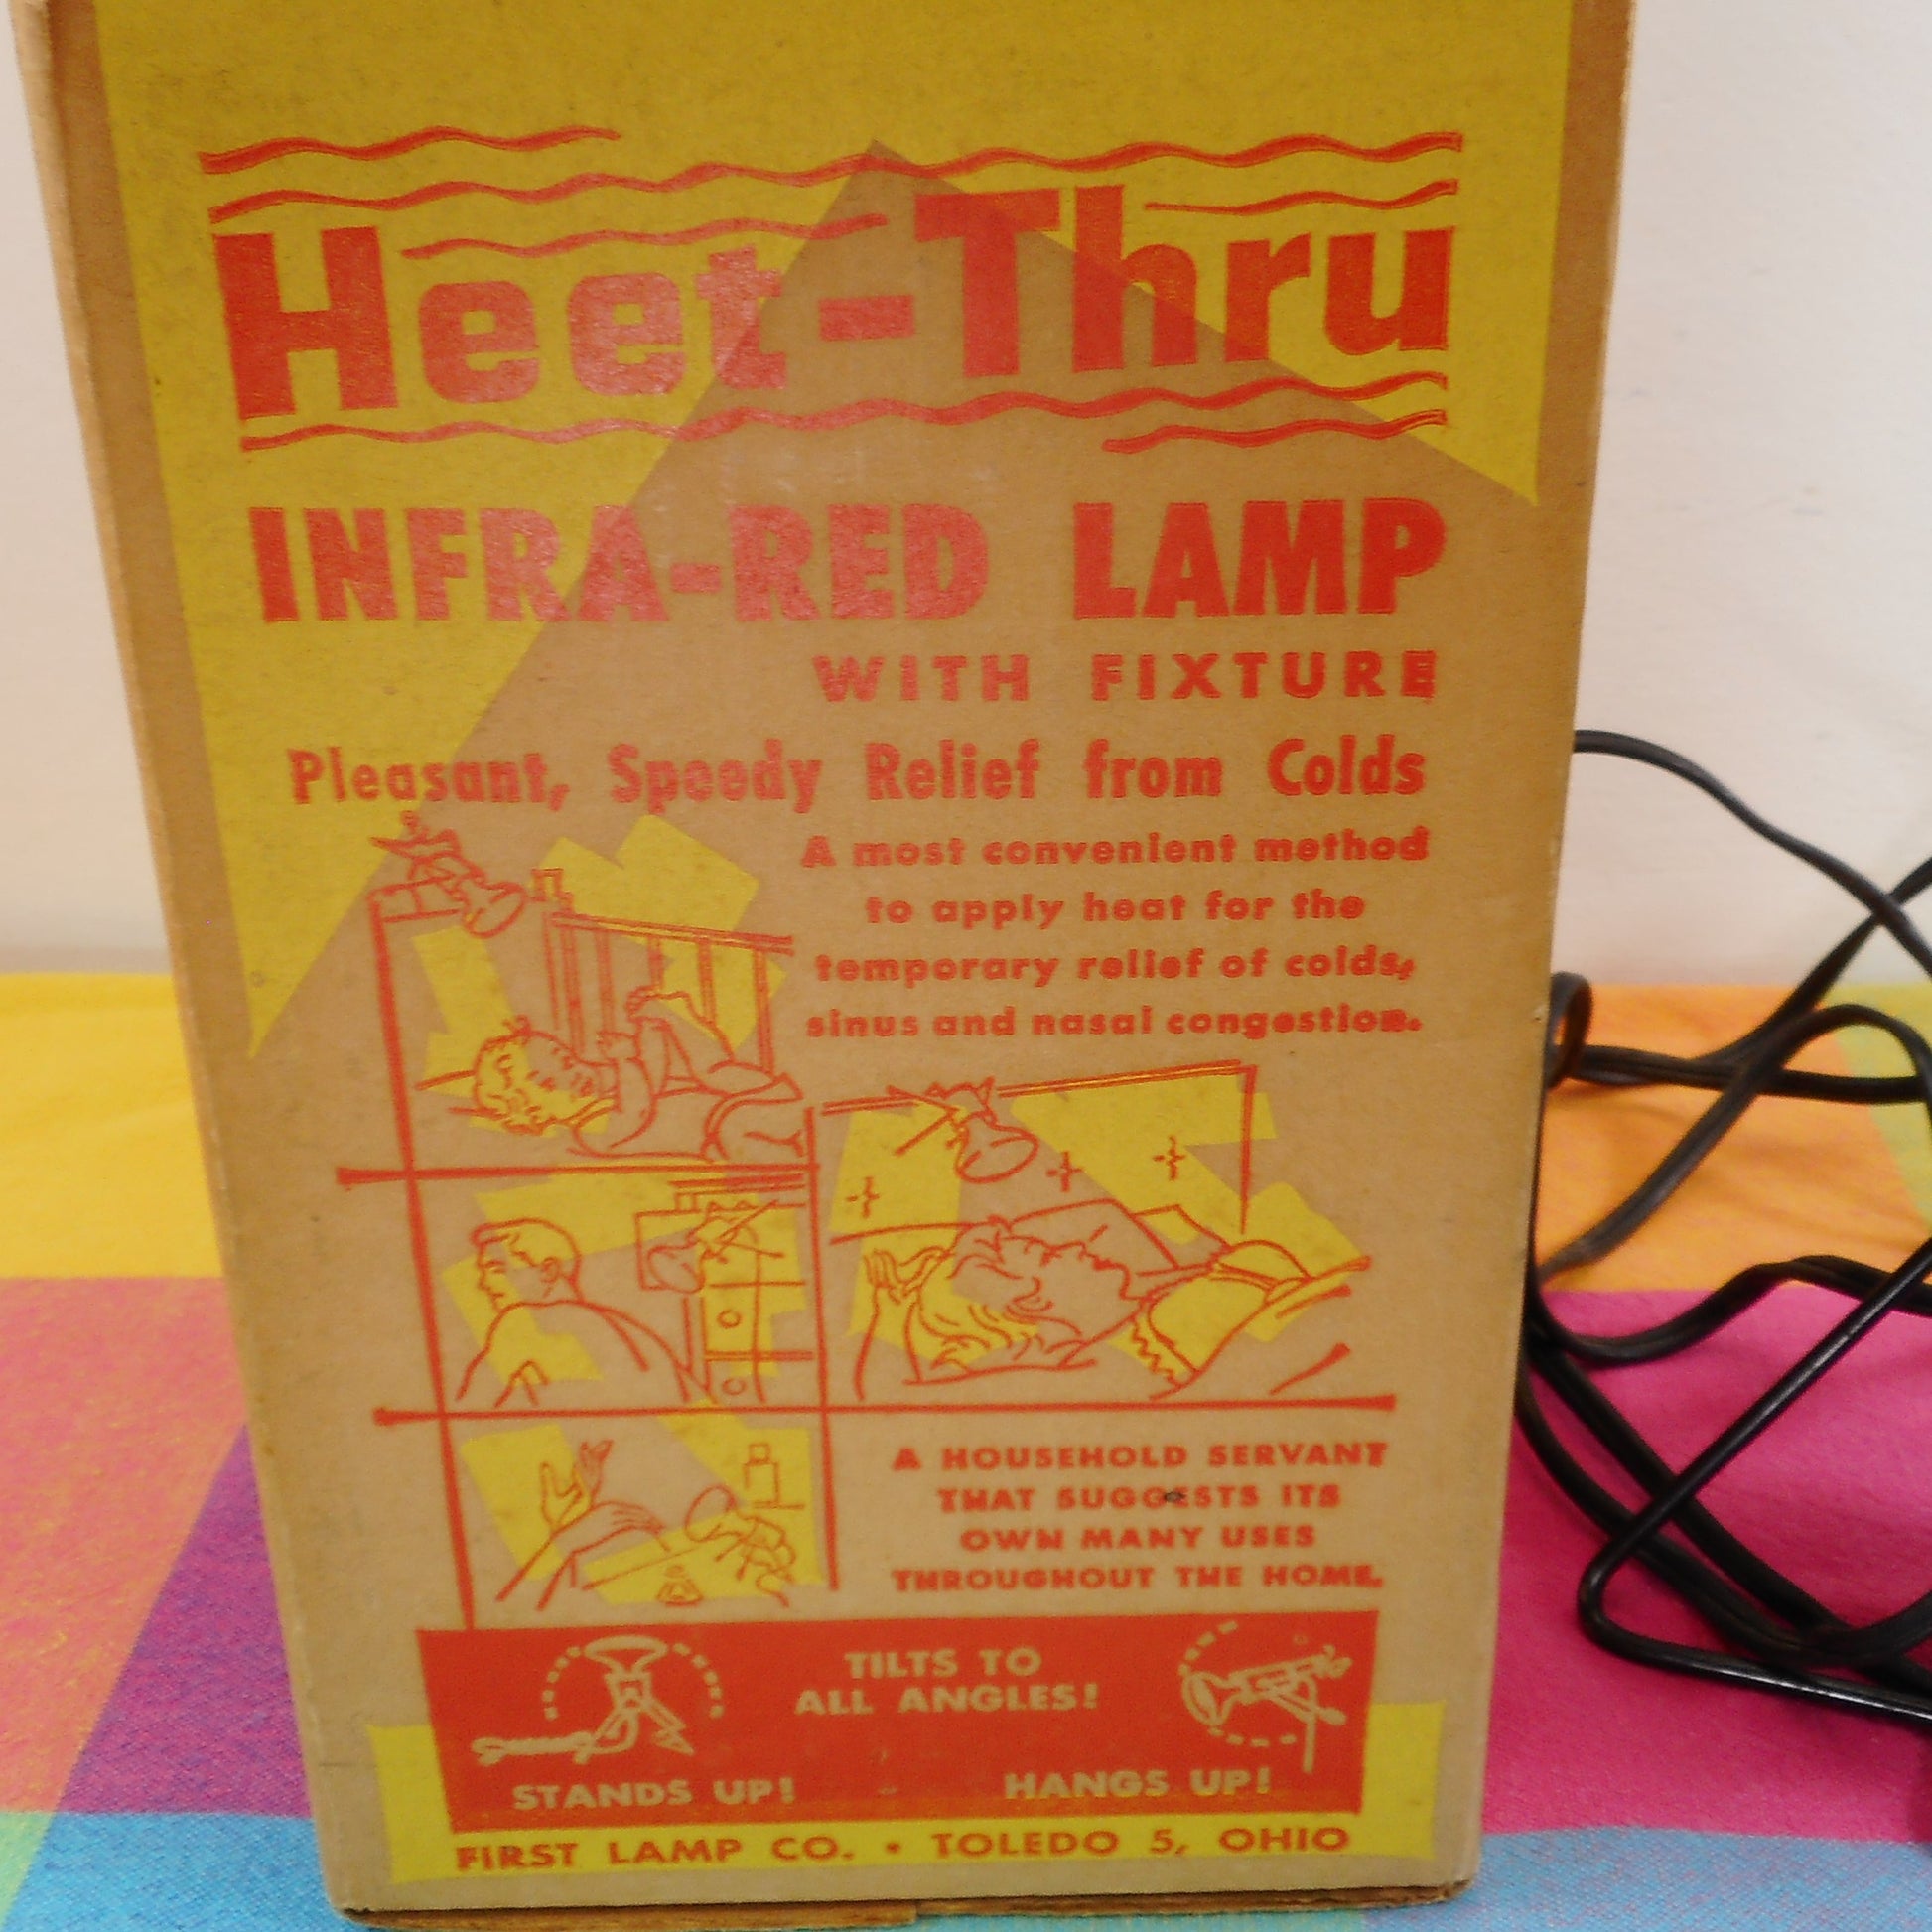 Heet-Thru Vintage Infra-Red Lamp Model LH-1 with Box - First Lamp Co. Toledo Ohio Used